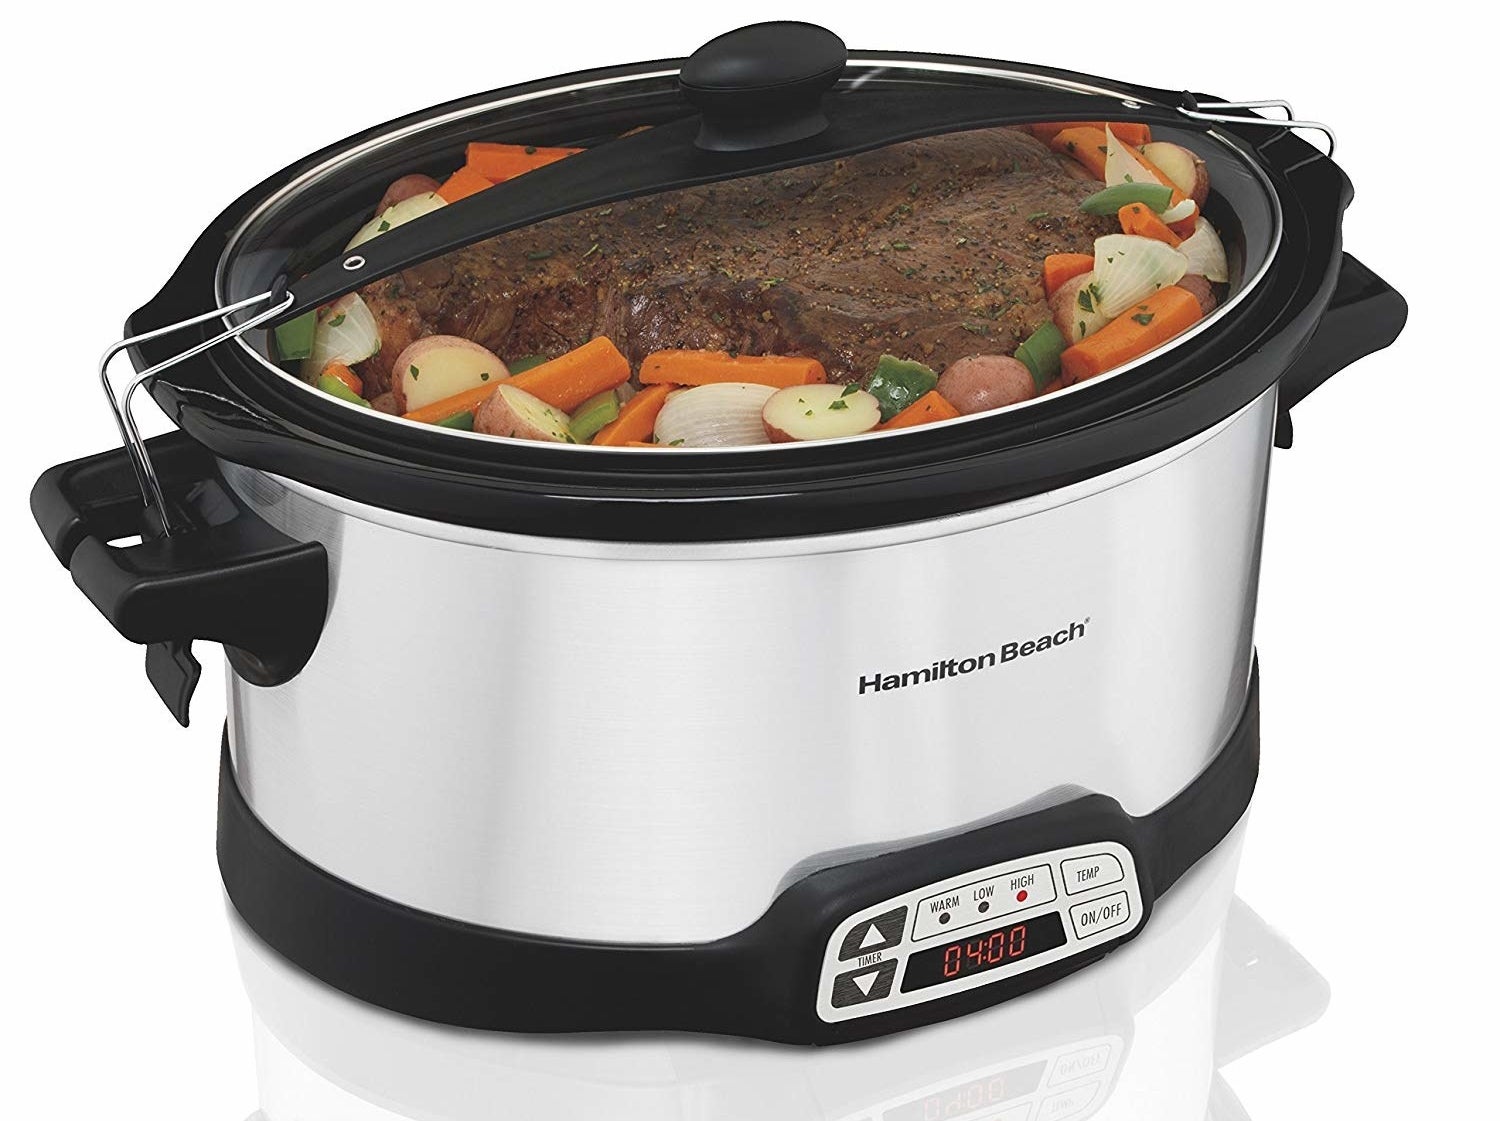 The stainless steel slow cooker with meat and veggies inside